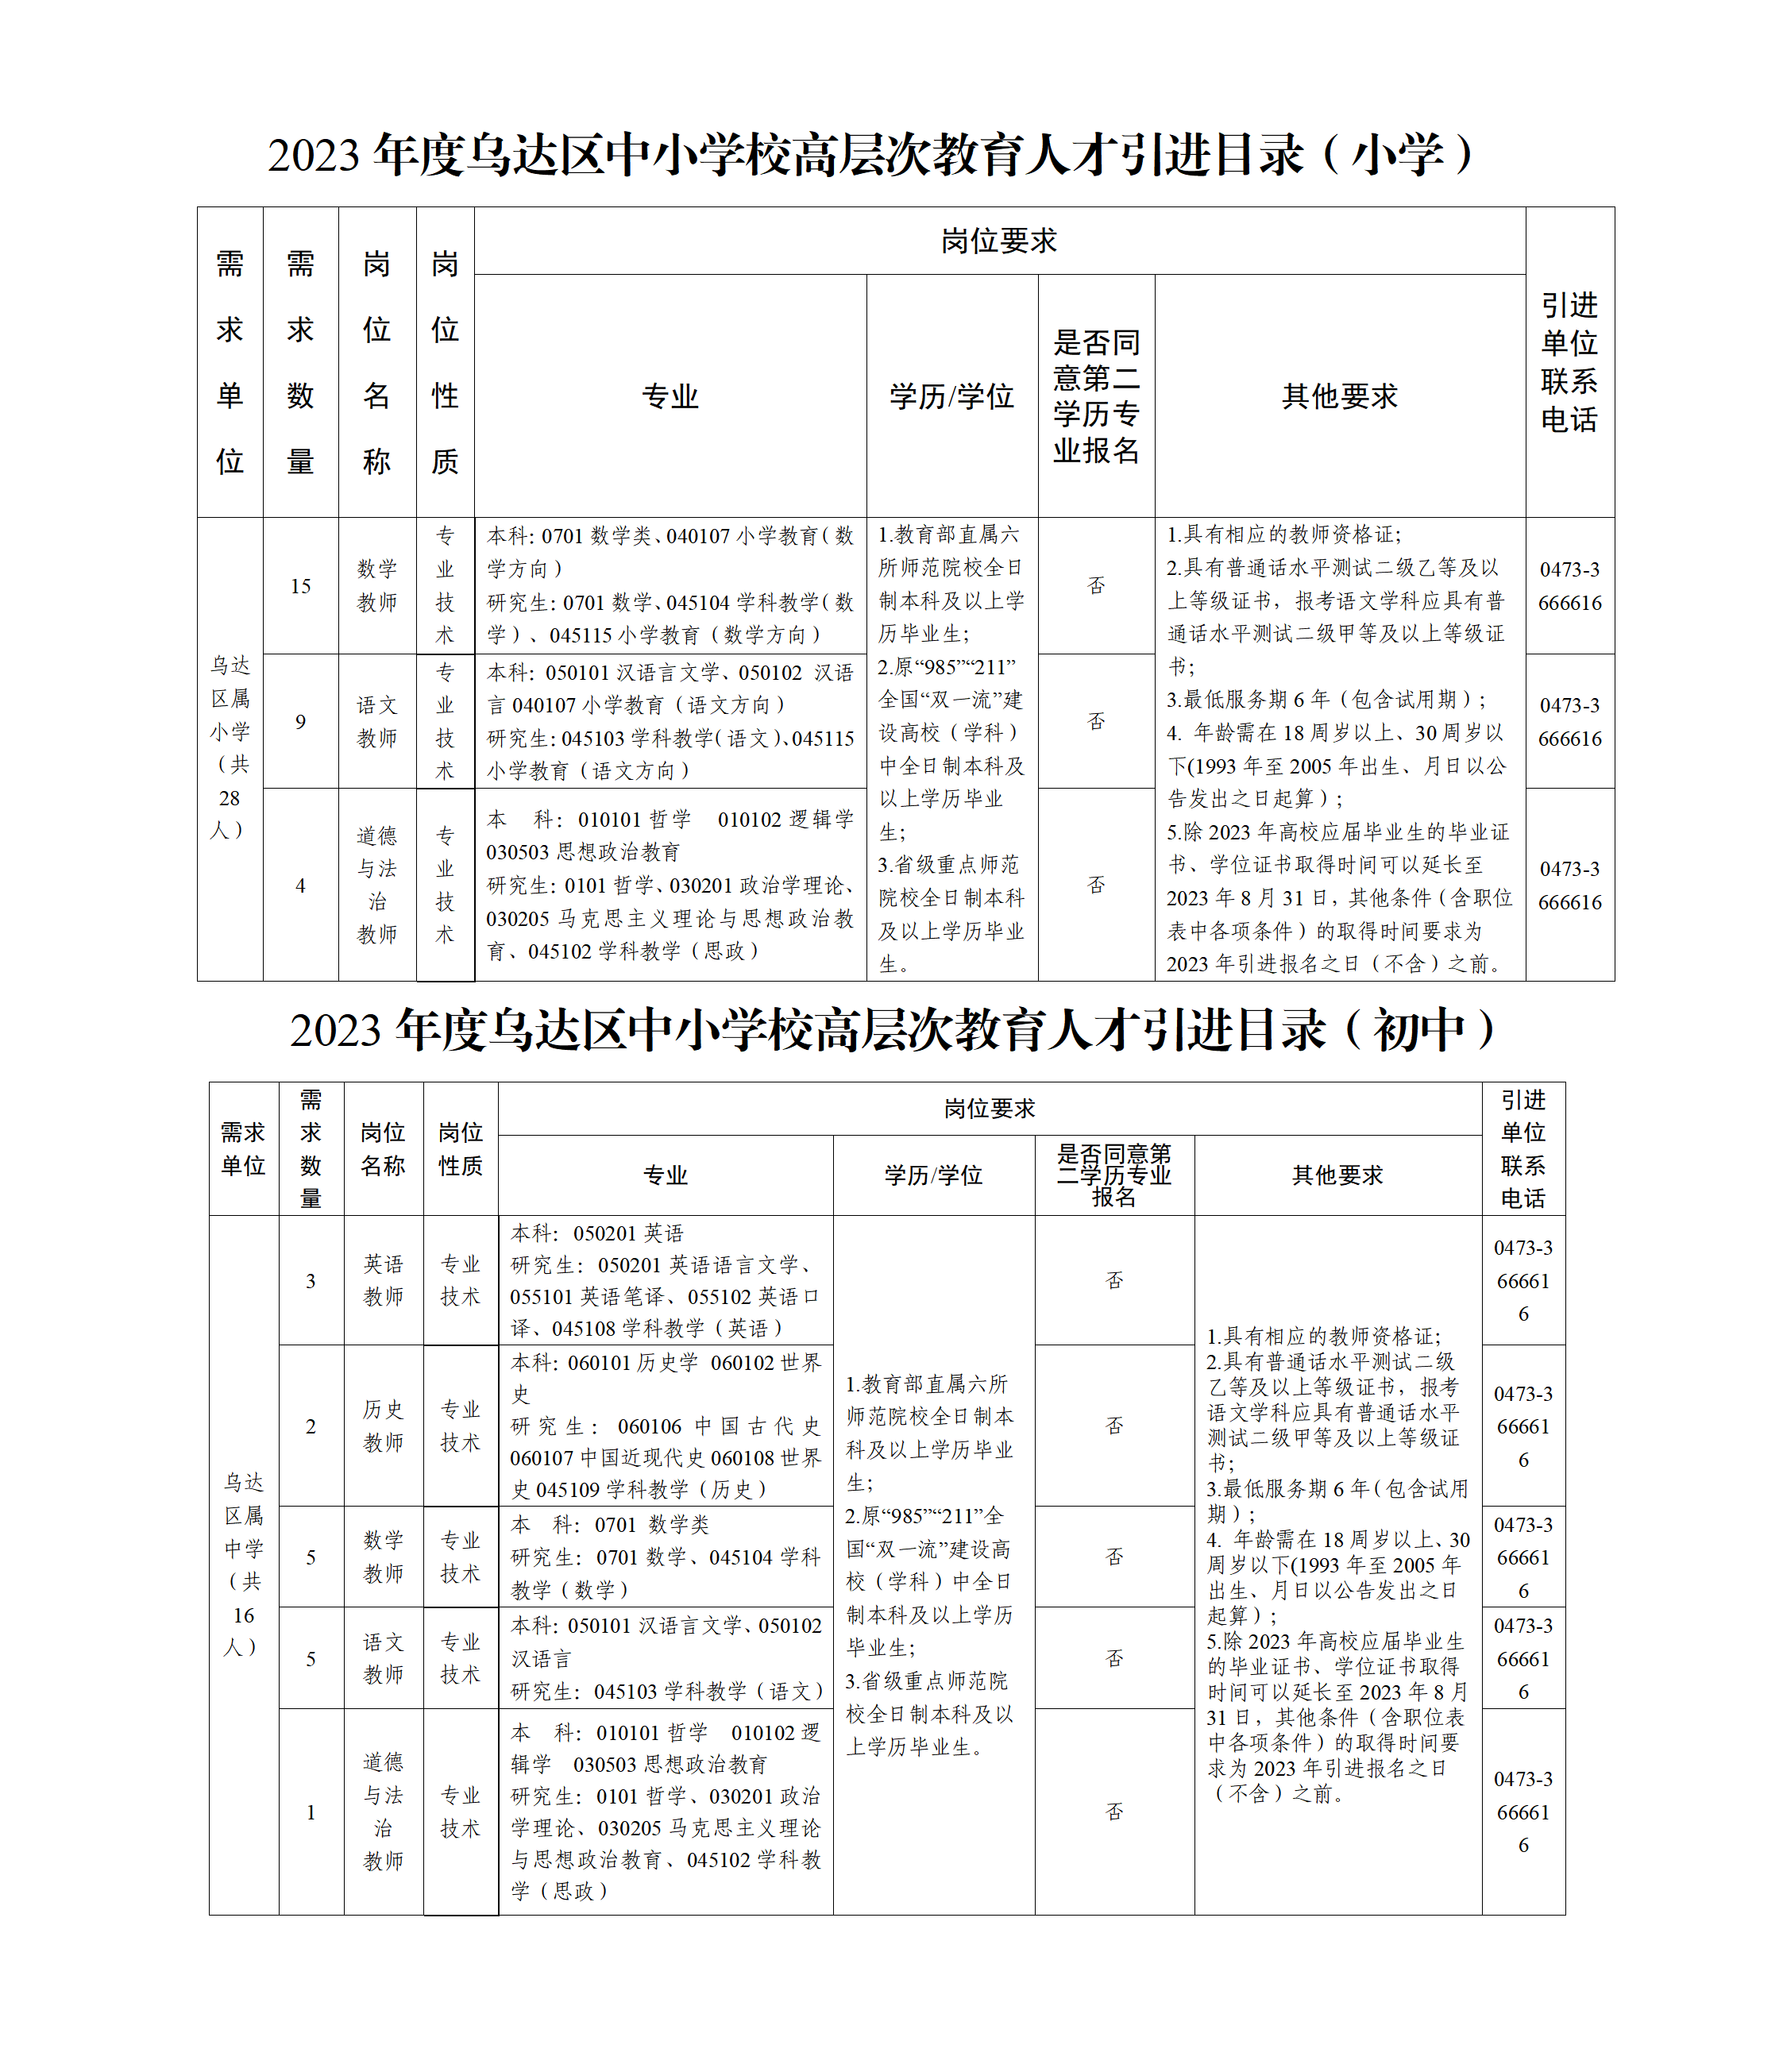 <i class='enemy' style='color:red'>附件</i>4：2023年度乌达区中小学校<i class='enemy' style='color:red'>高层次</i>教育人才引进目录.png